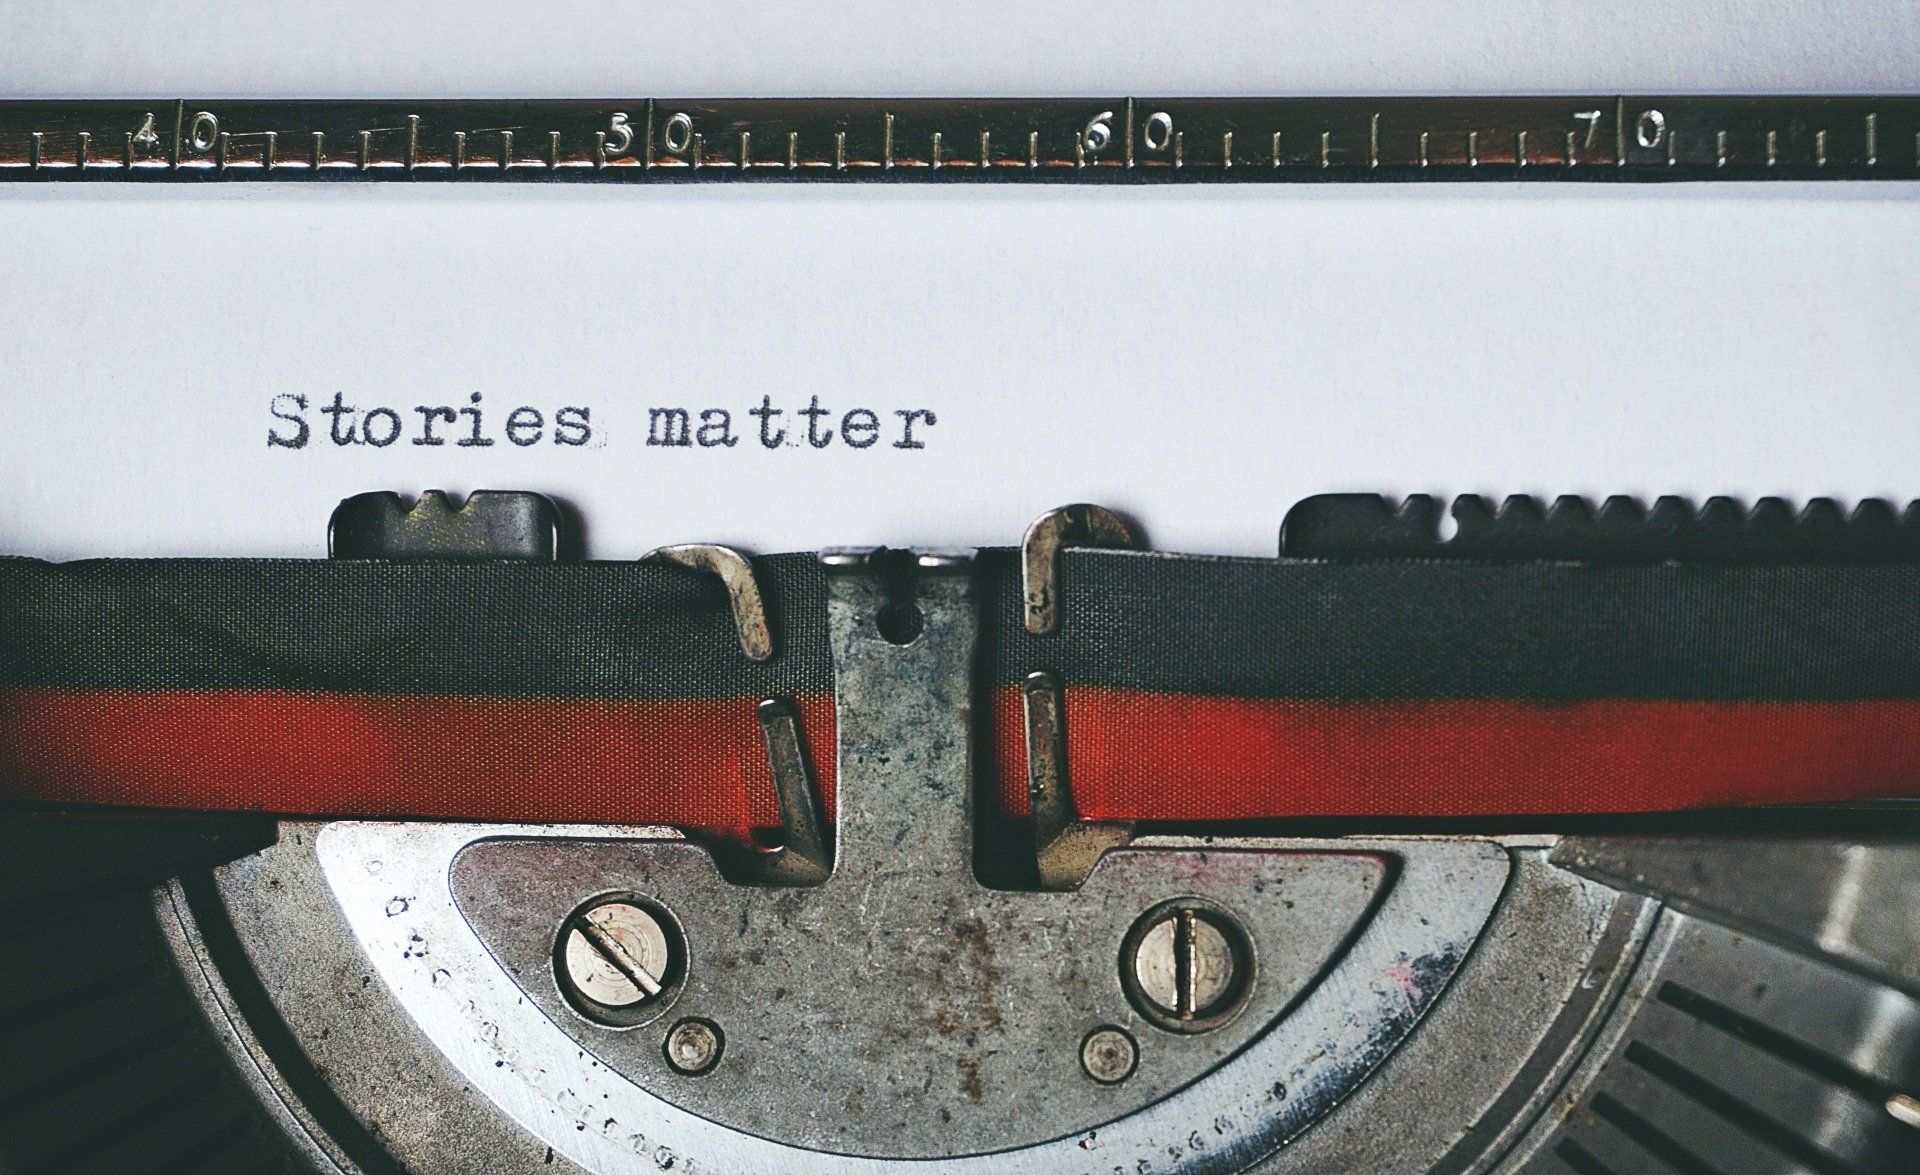 Ribbon of a typewriter with Stories matter typed onto the paper